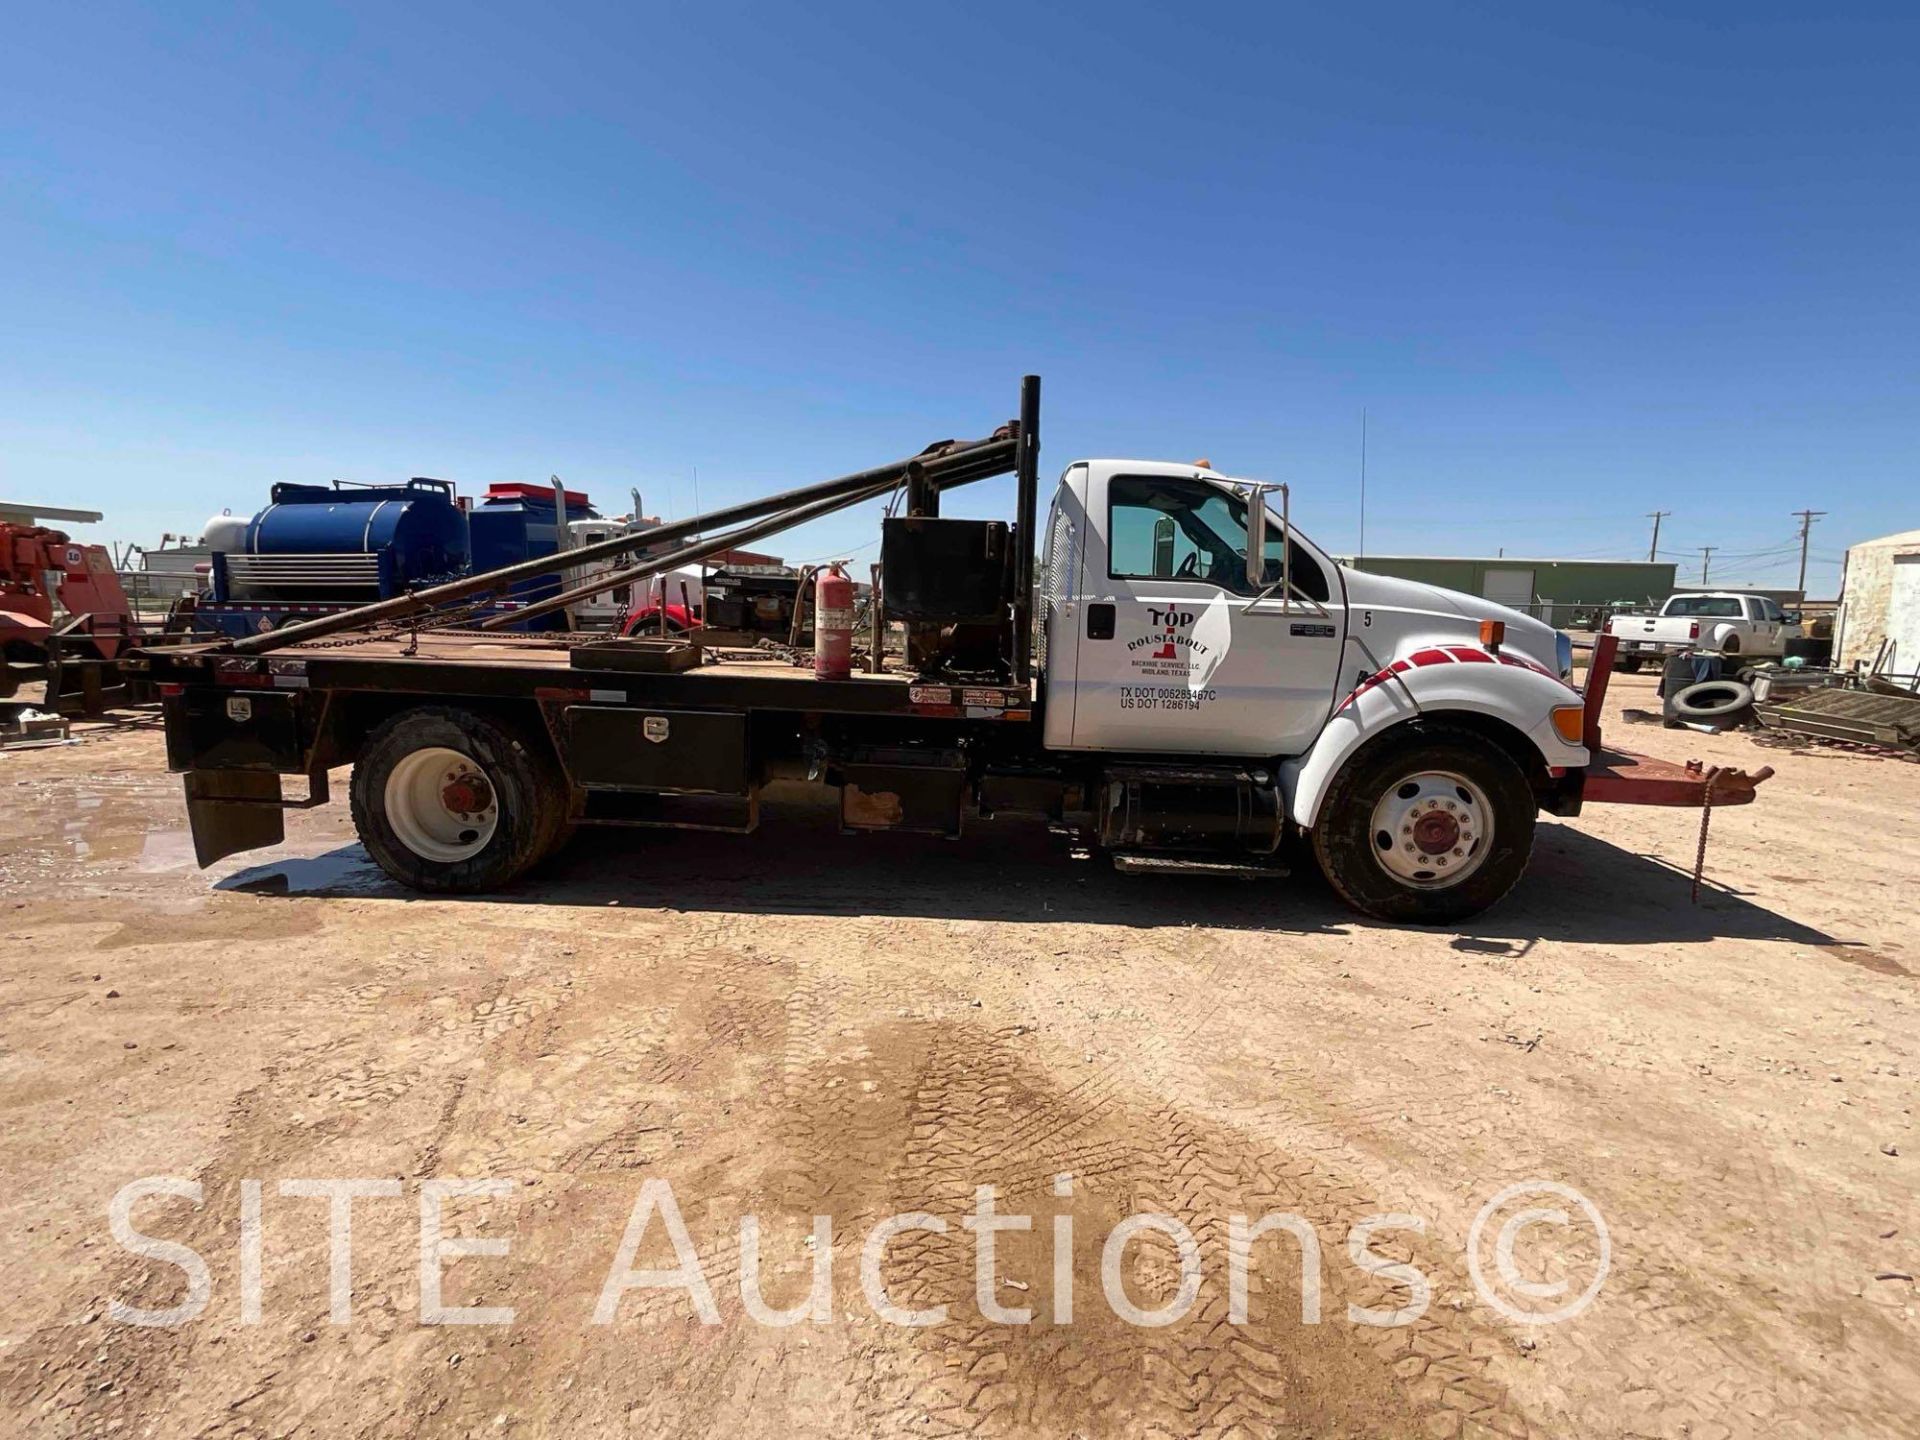 2013 Ford F650 SD Gin Pole Truck - Image 4 of 26